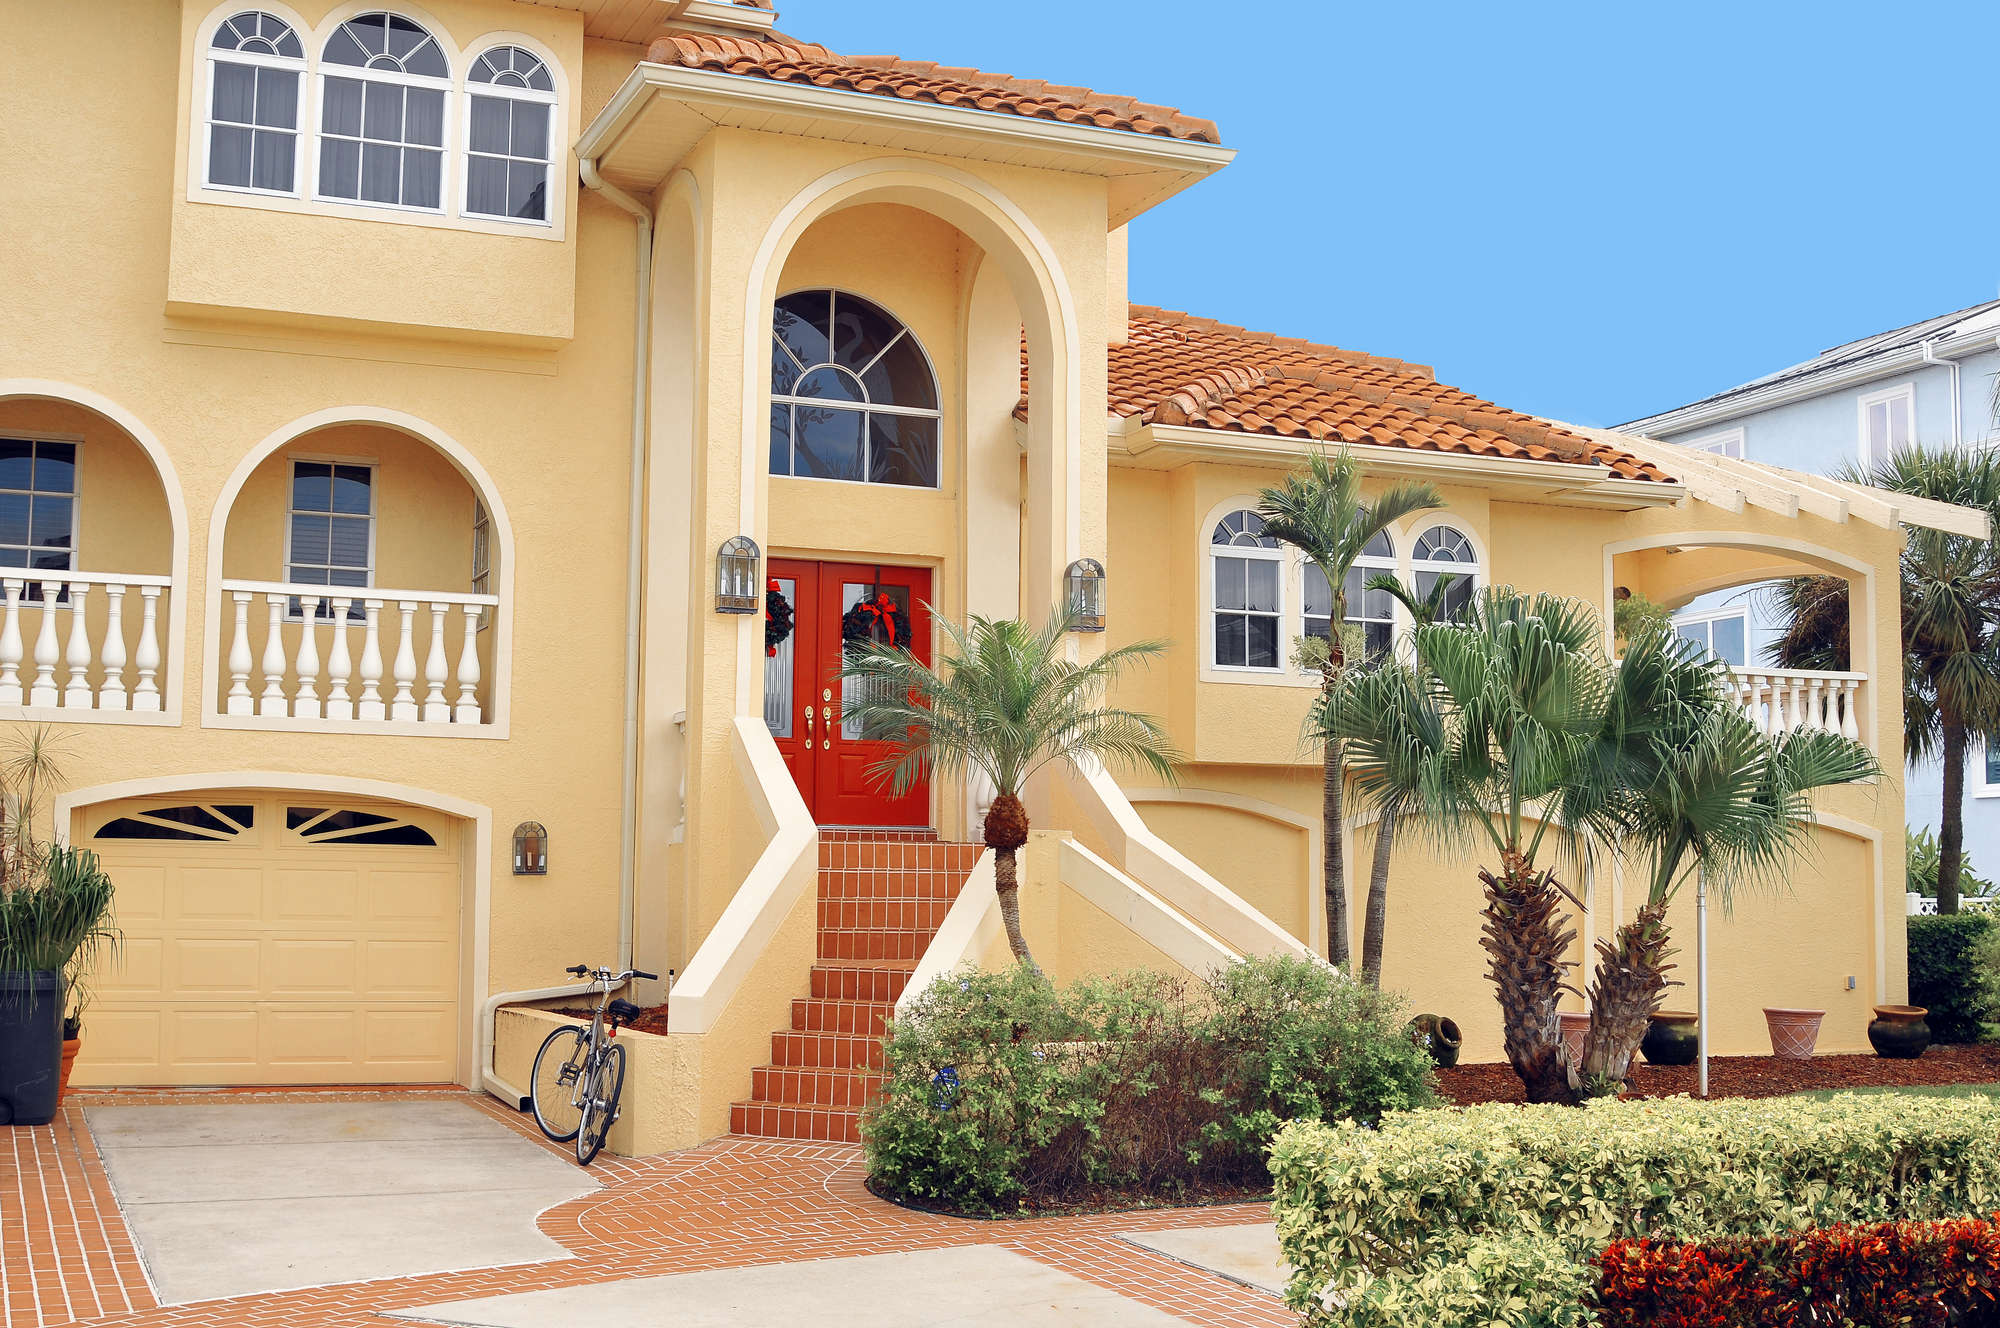 Top 4 Benefits of Painting Your Home’s Exterior